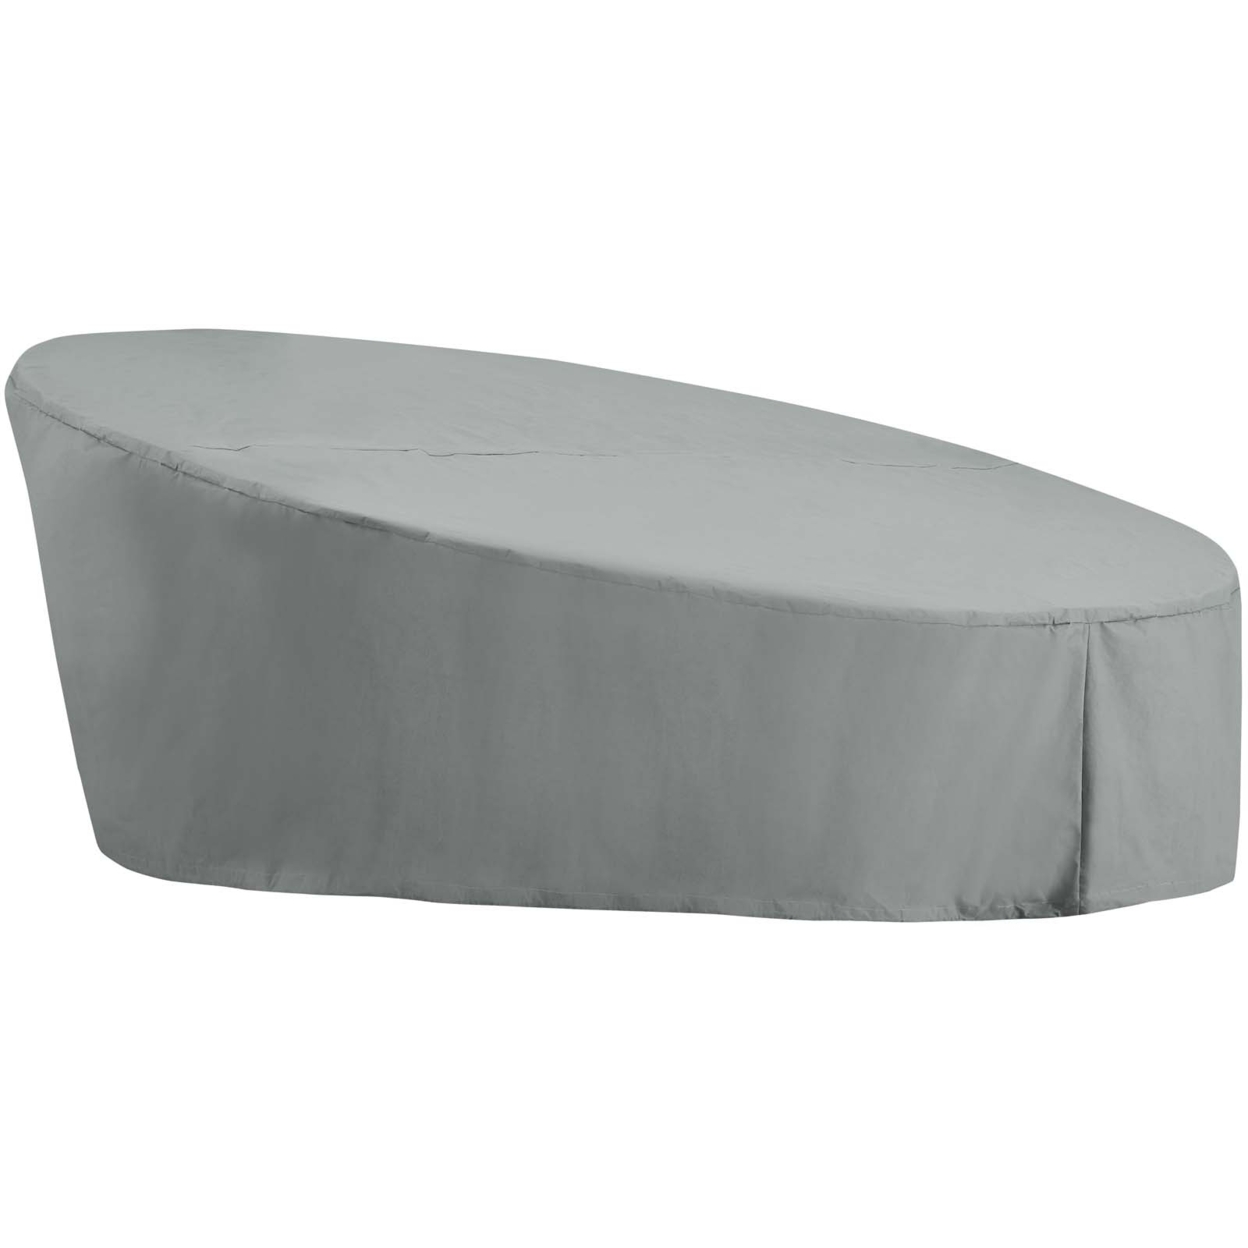 Immerse Convene, Sojourn, Summon Daybed Outdoor Patio Furniture Cover